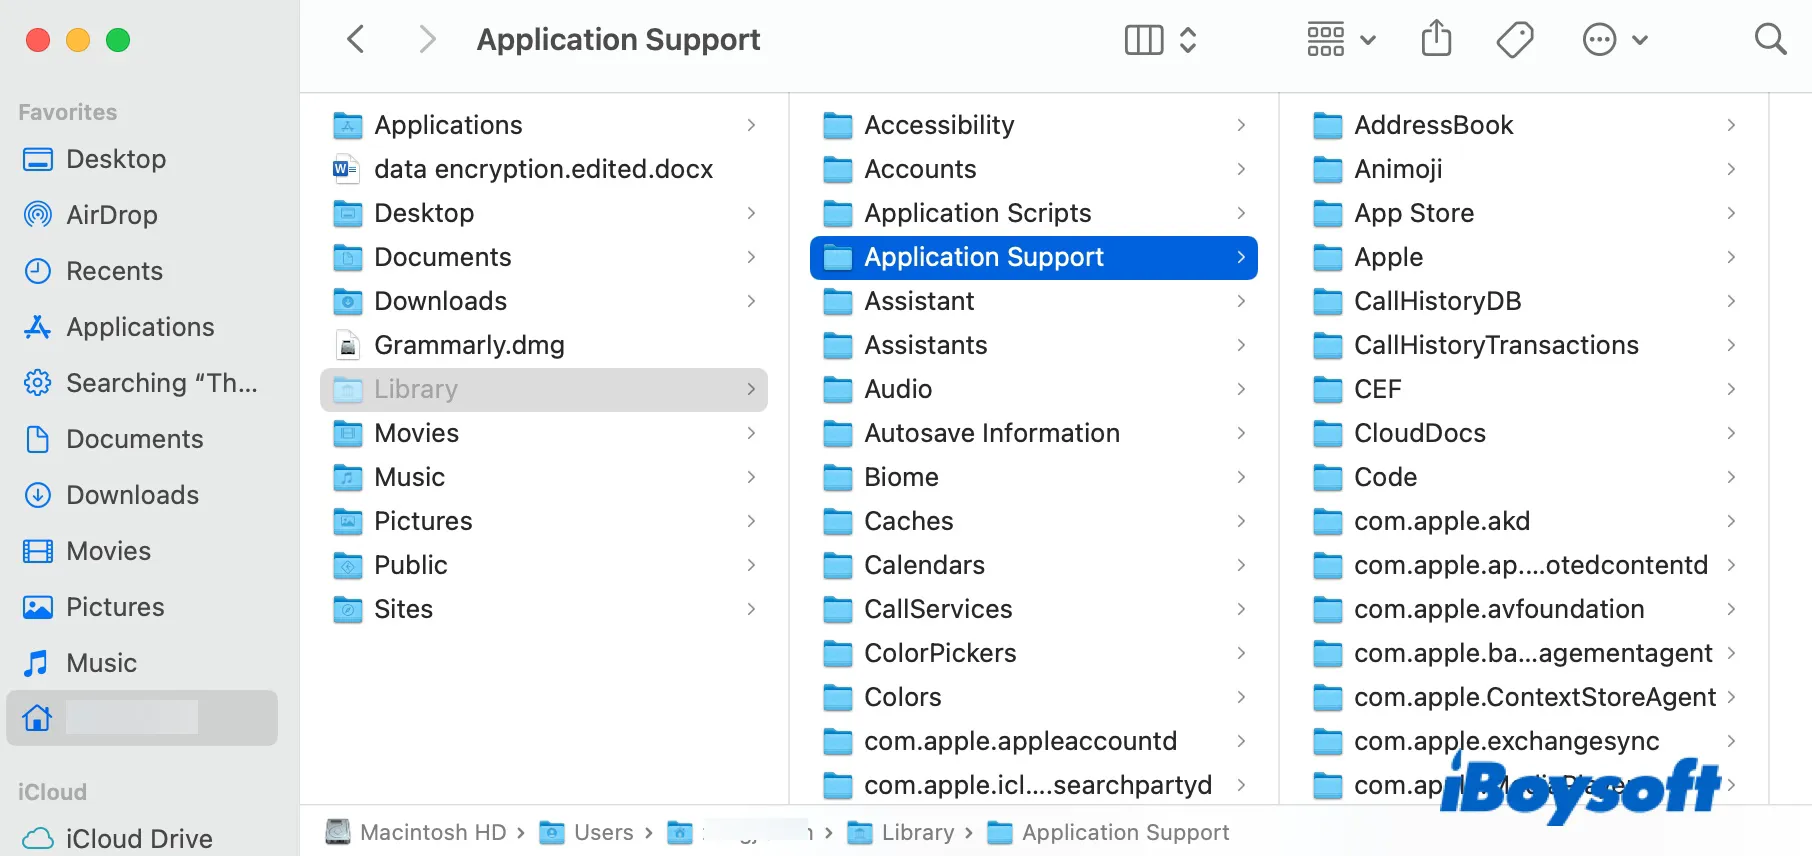 Application Support is part of the equivelant of AppData folder on Mac